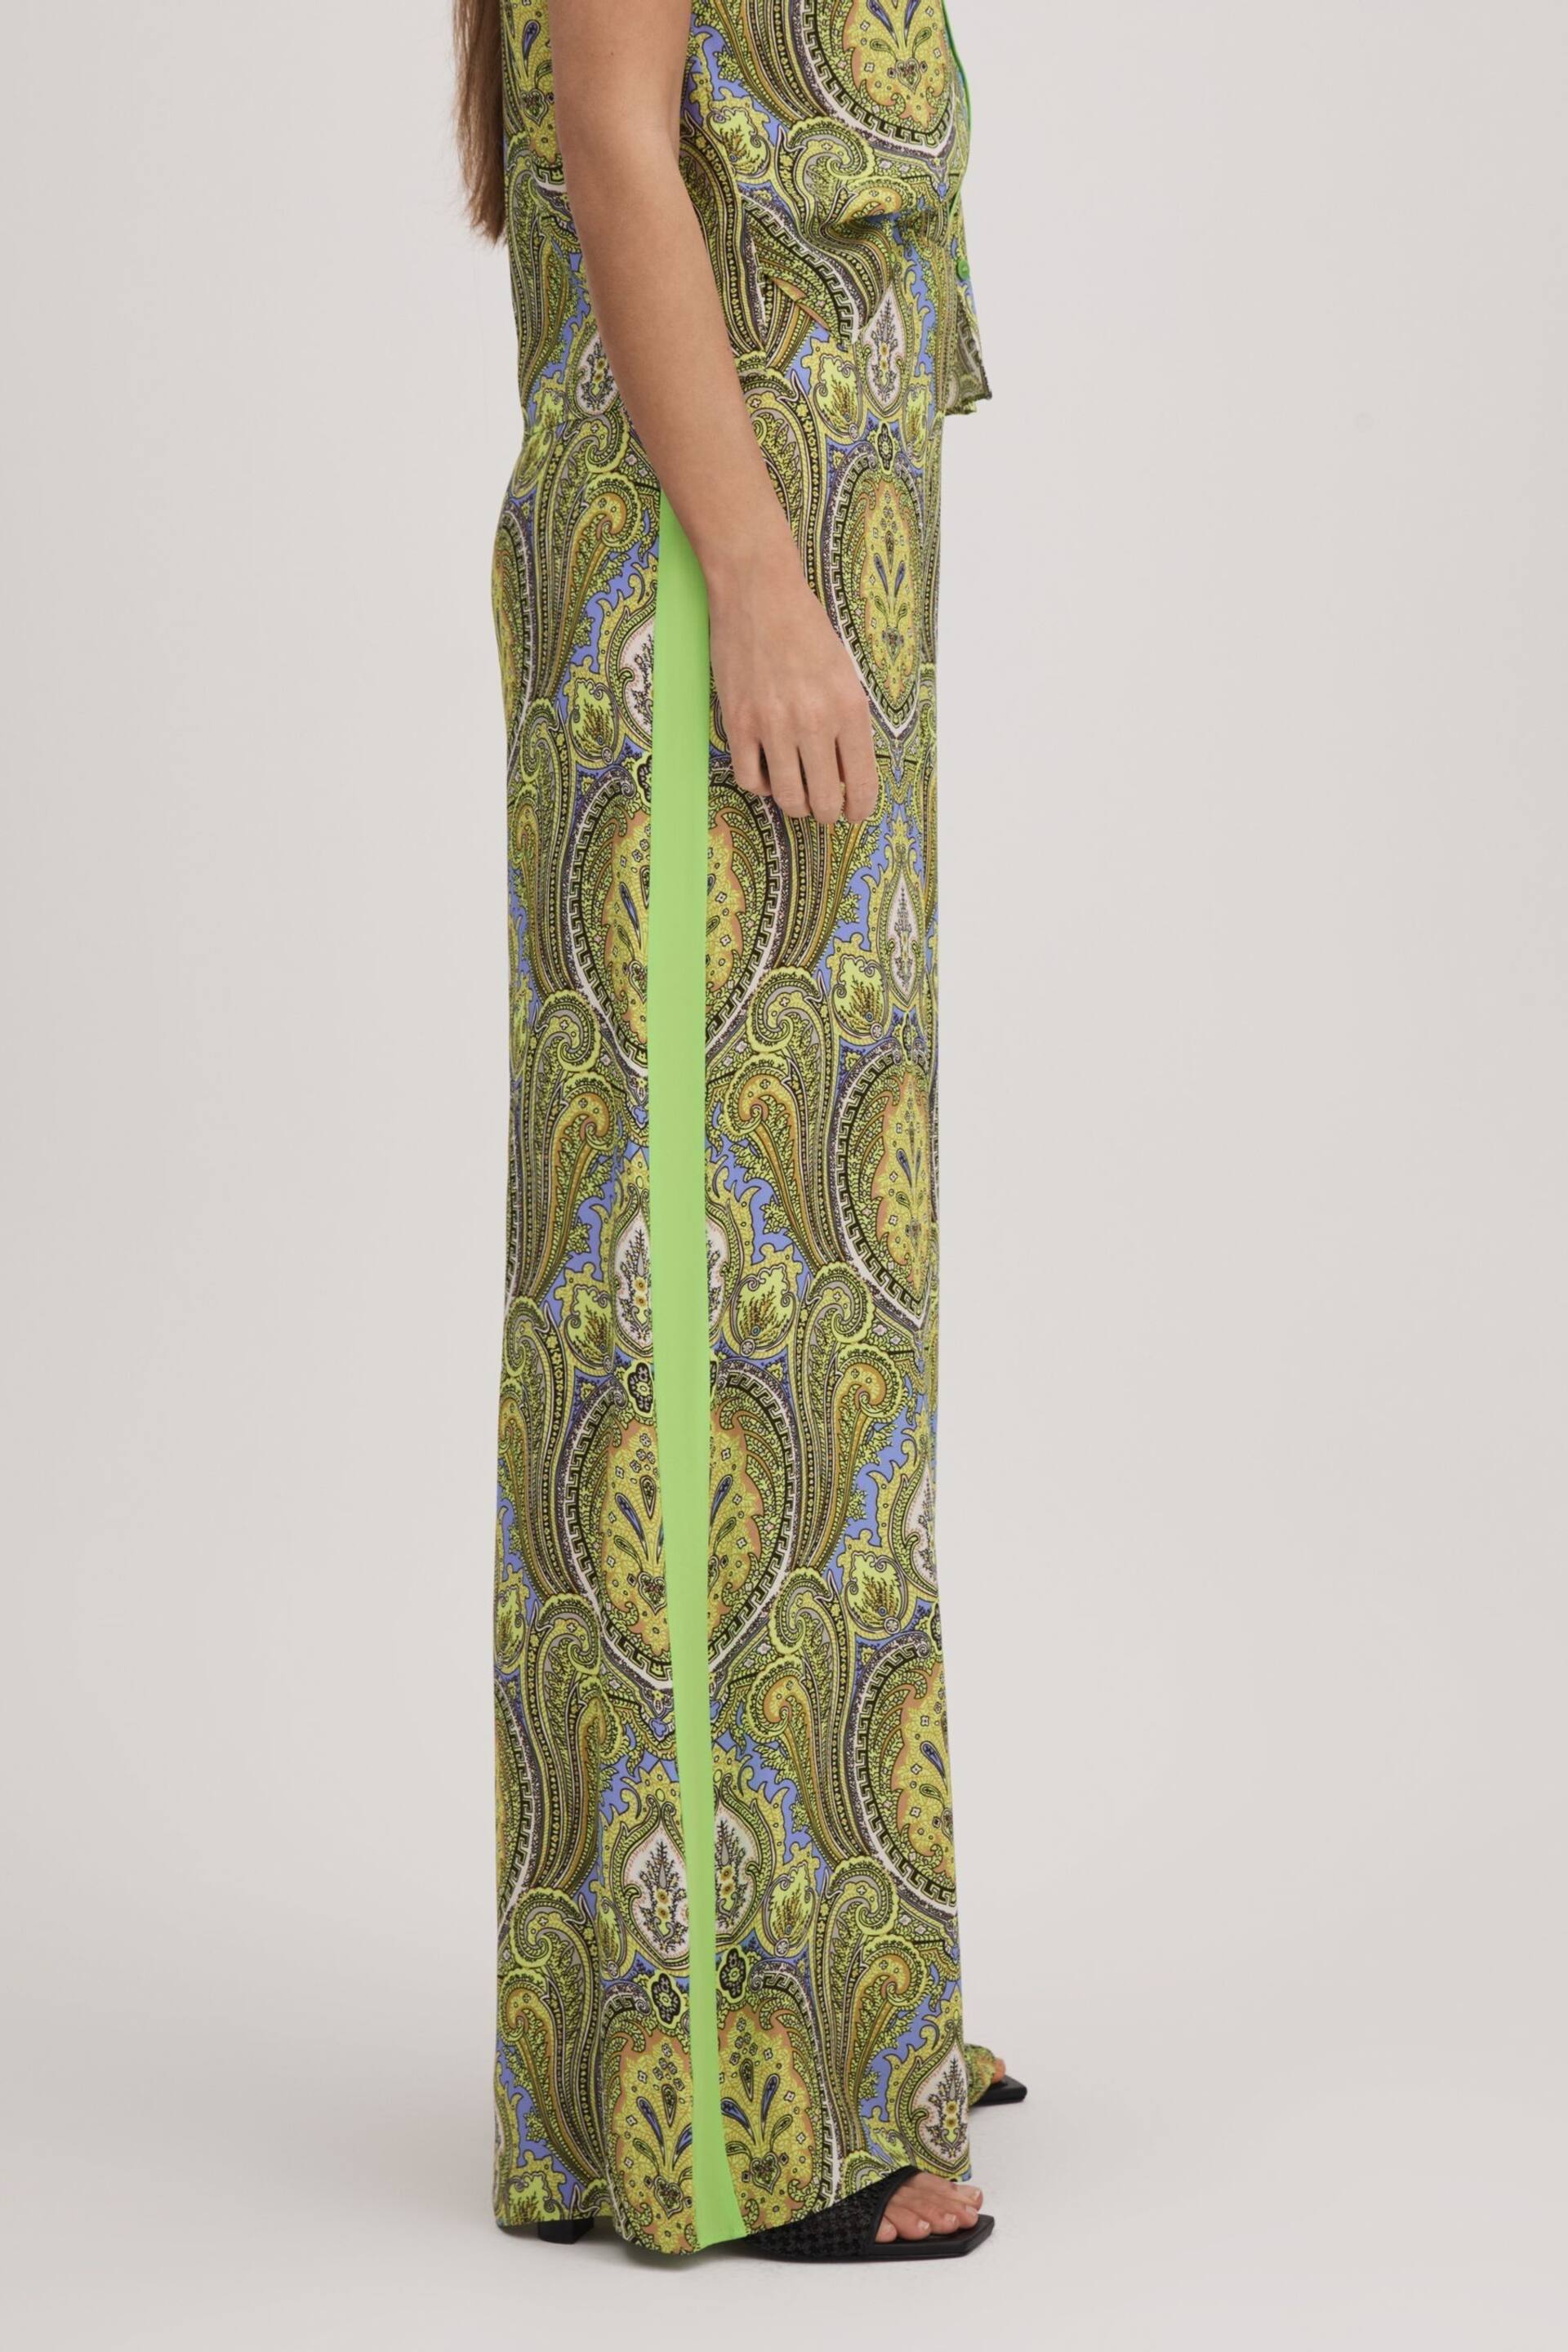 Florere Printed Wide Leg Trousers - Image 3 of 6